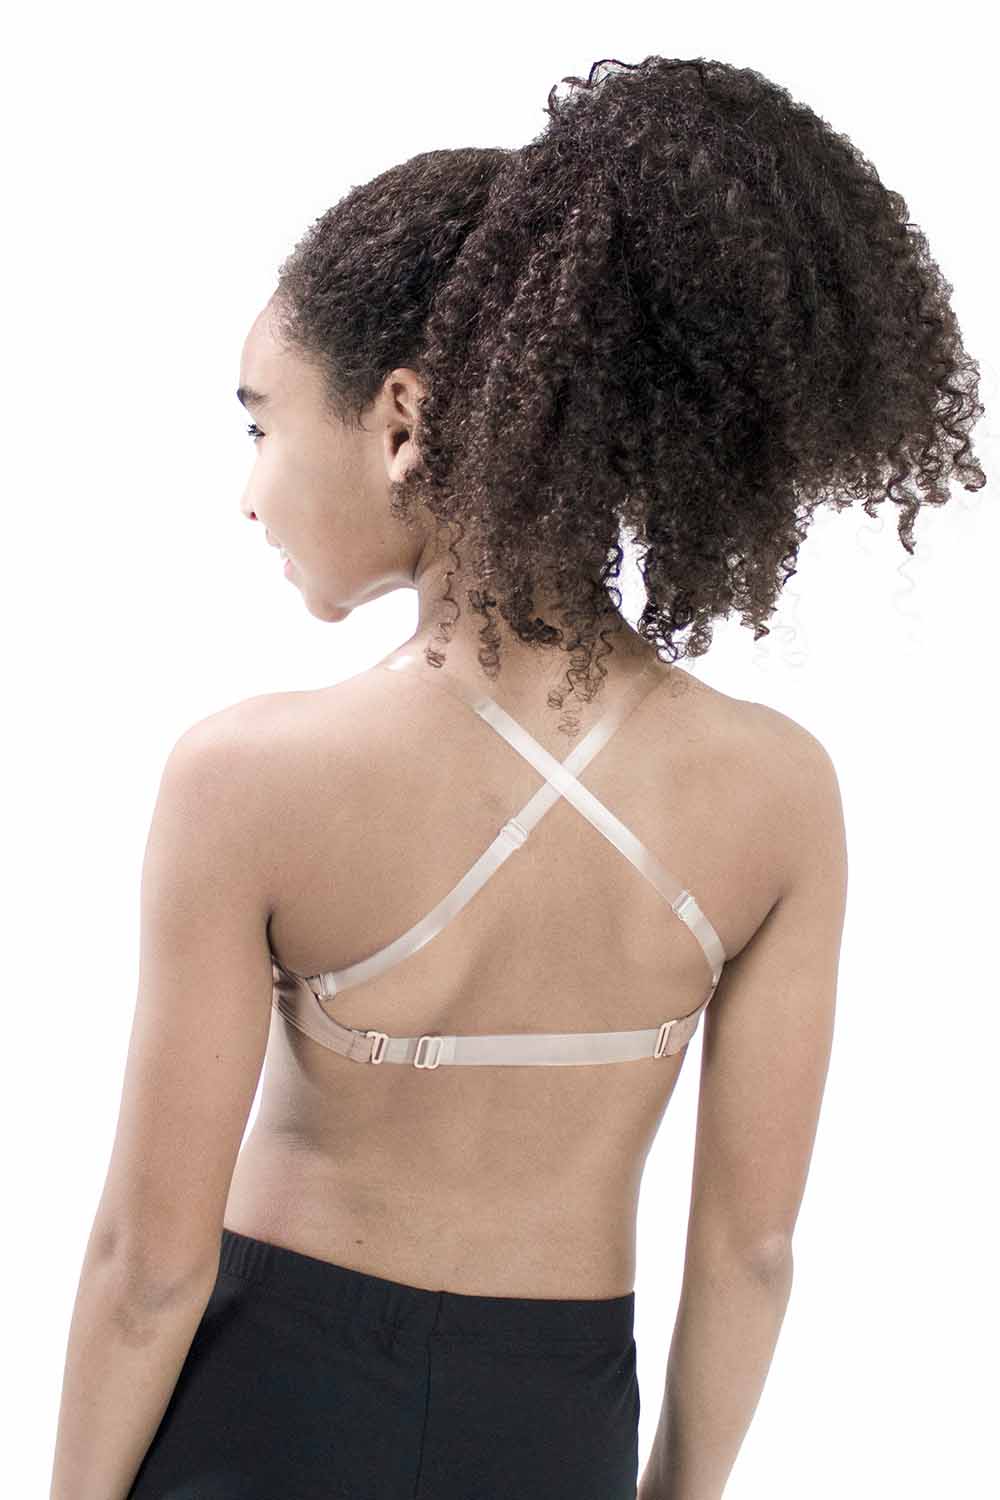 Pack of 2-Imported Transparent Bras Back Straps For Women/Girls p